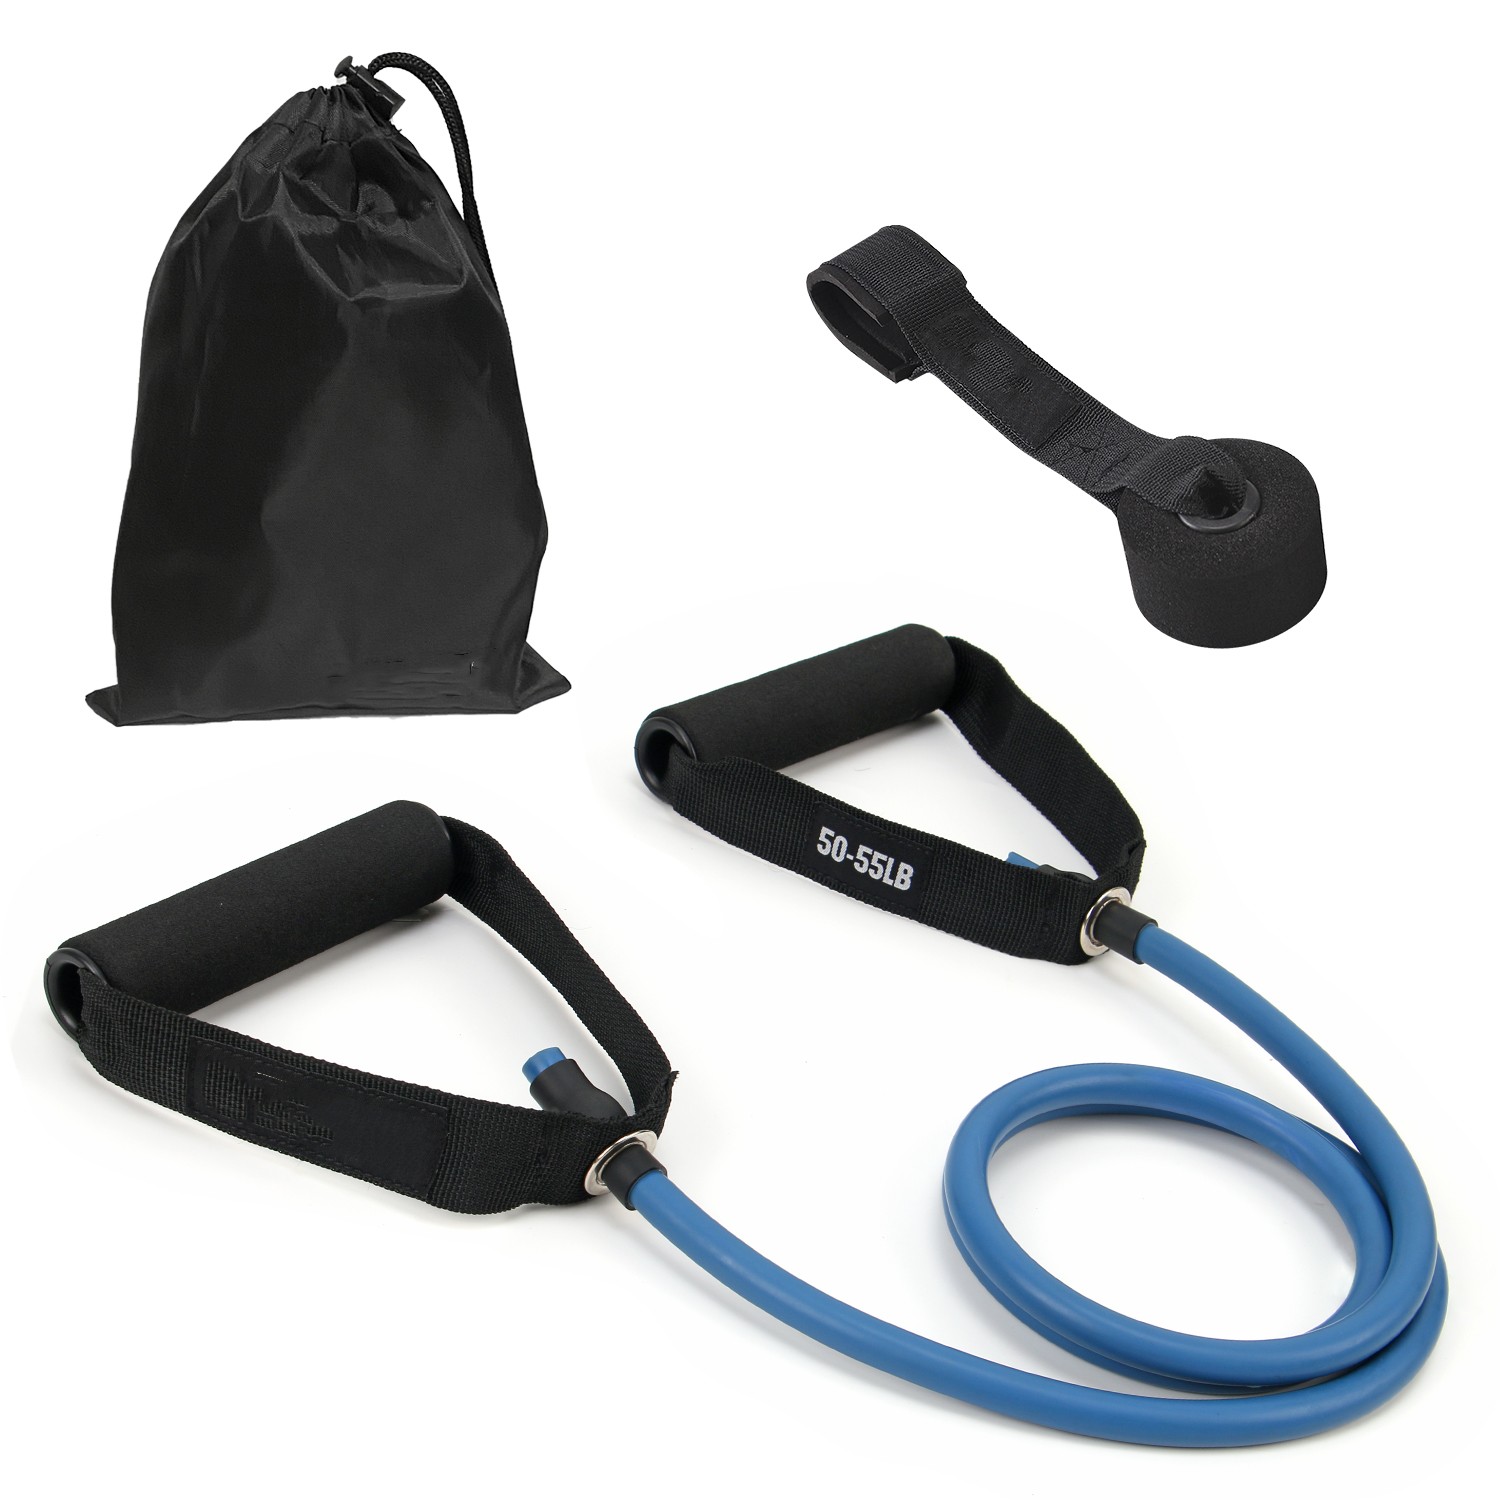 50 LBS SINGLE RESISTANCE EXERCISE BANDS